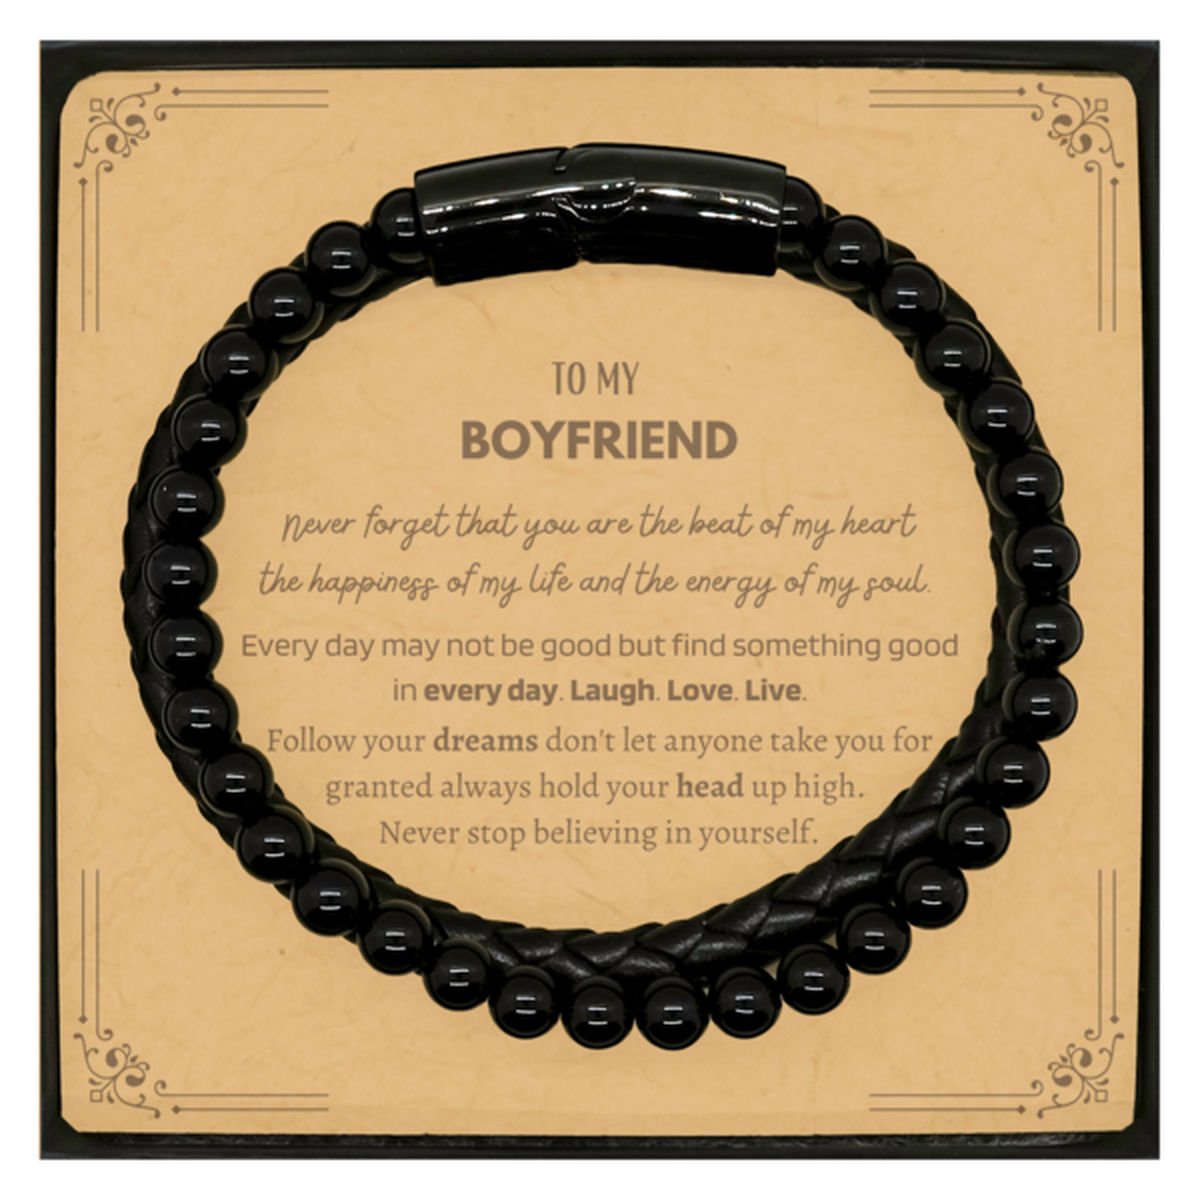 To My Boyfriend Message Card Gifts, Christmas Boyfriend Stone Leather Bracelets Present, Birthday Unique Motivational For Boyfriend, To My Boyfriend Never forget that you are the beat of my heart the happiness of my life and the energy of my soul